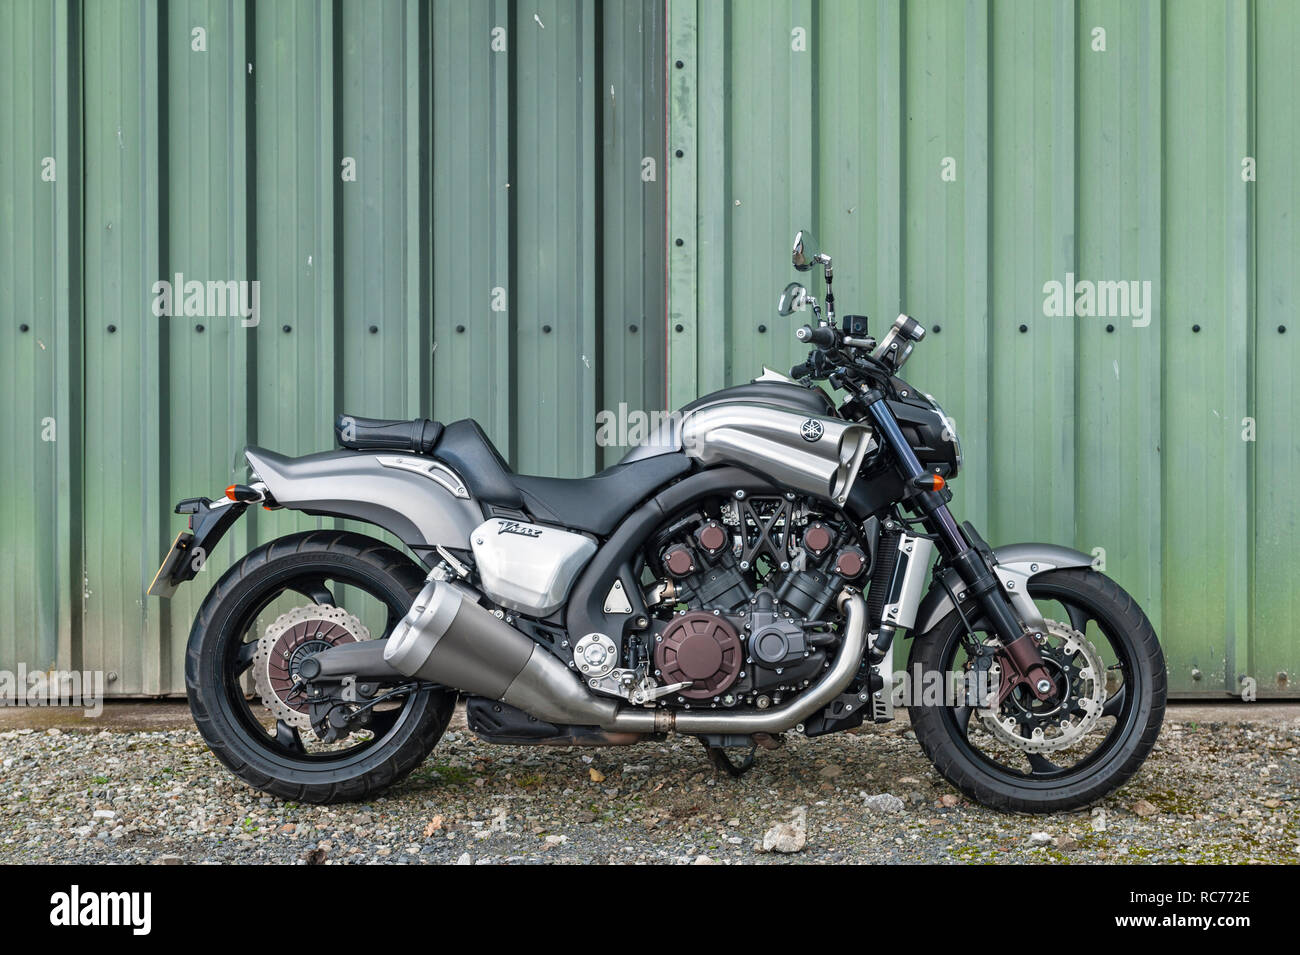 UK. Yamaha VMAX motorcycle, with a 4-cylinder liquid cooled 1679cc V4 engine Stock Photo